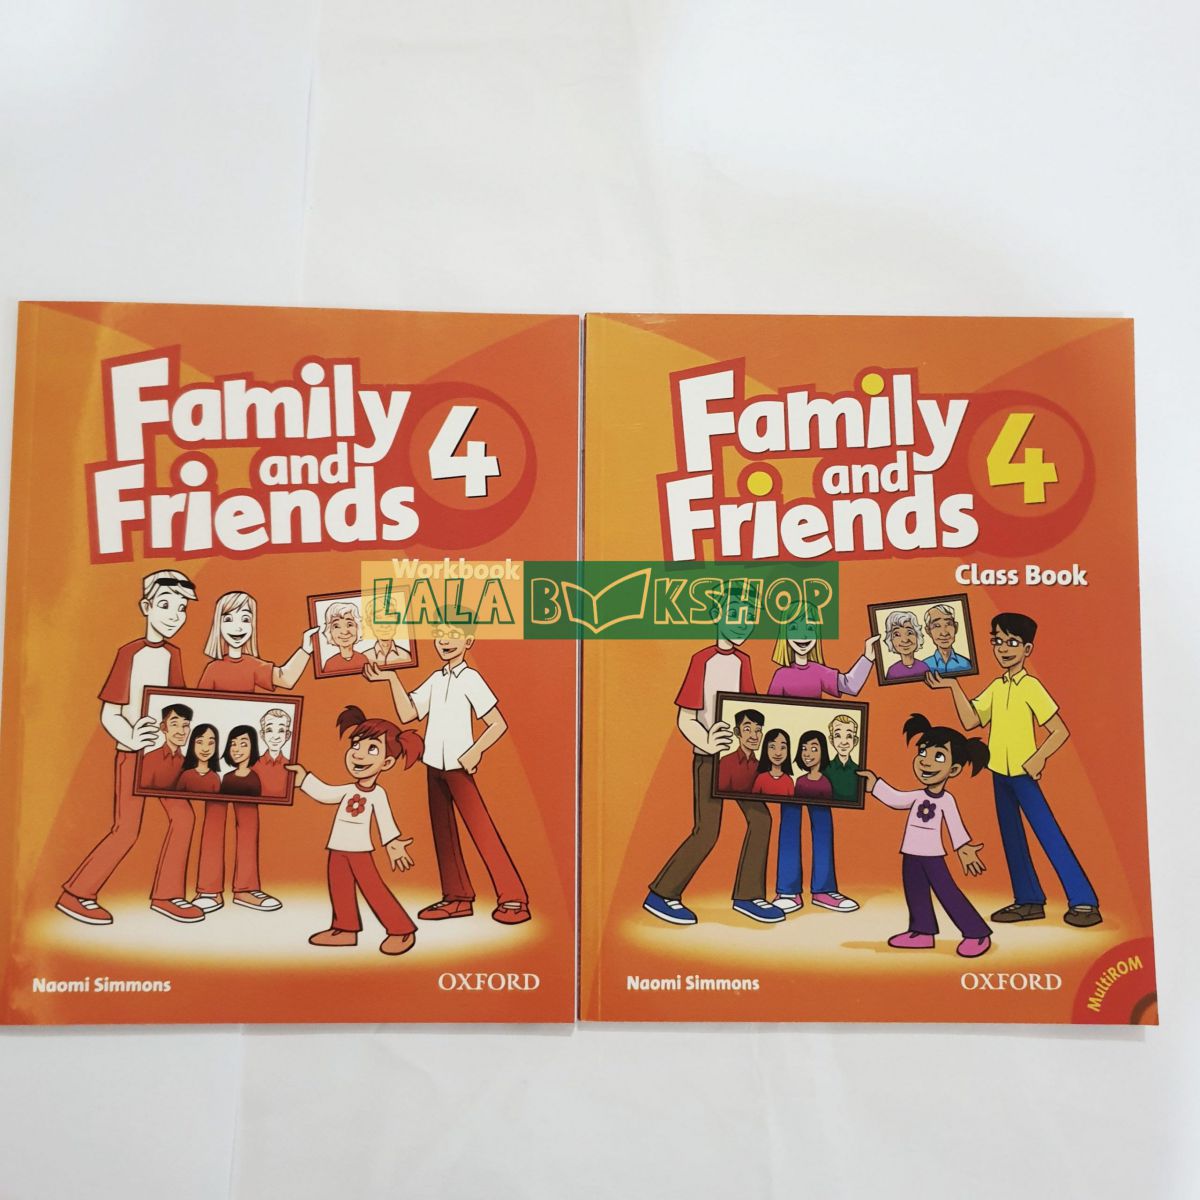 Family and friends 3 unit 11. Family and friends 2 11 Юнит. Family and friends уровни. Family and friends 4 Audio. Family and friends 4 students book.